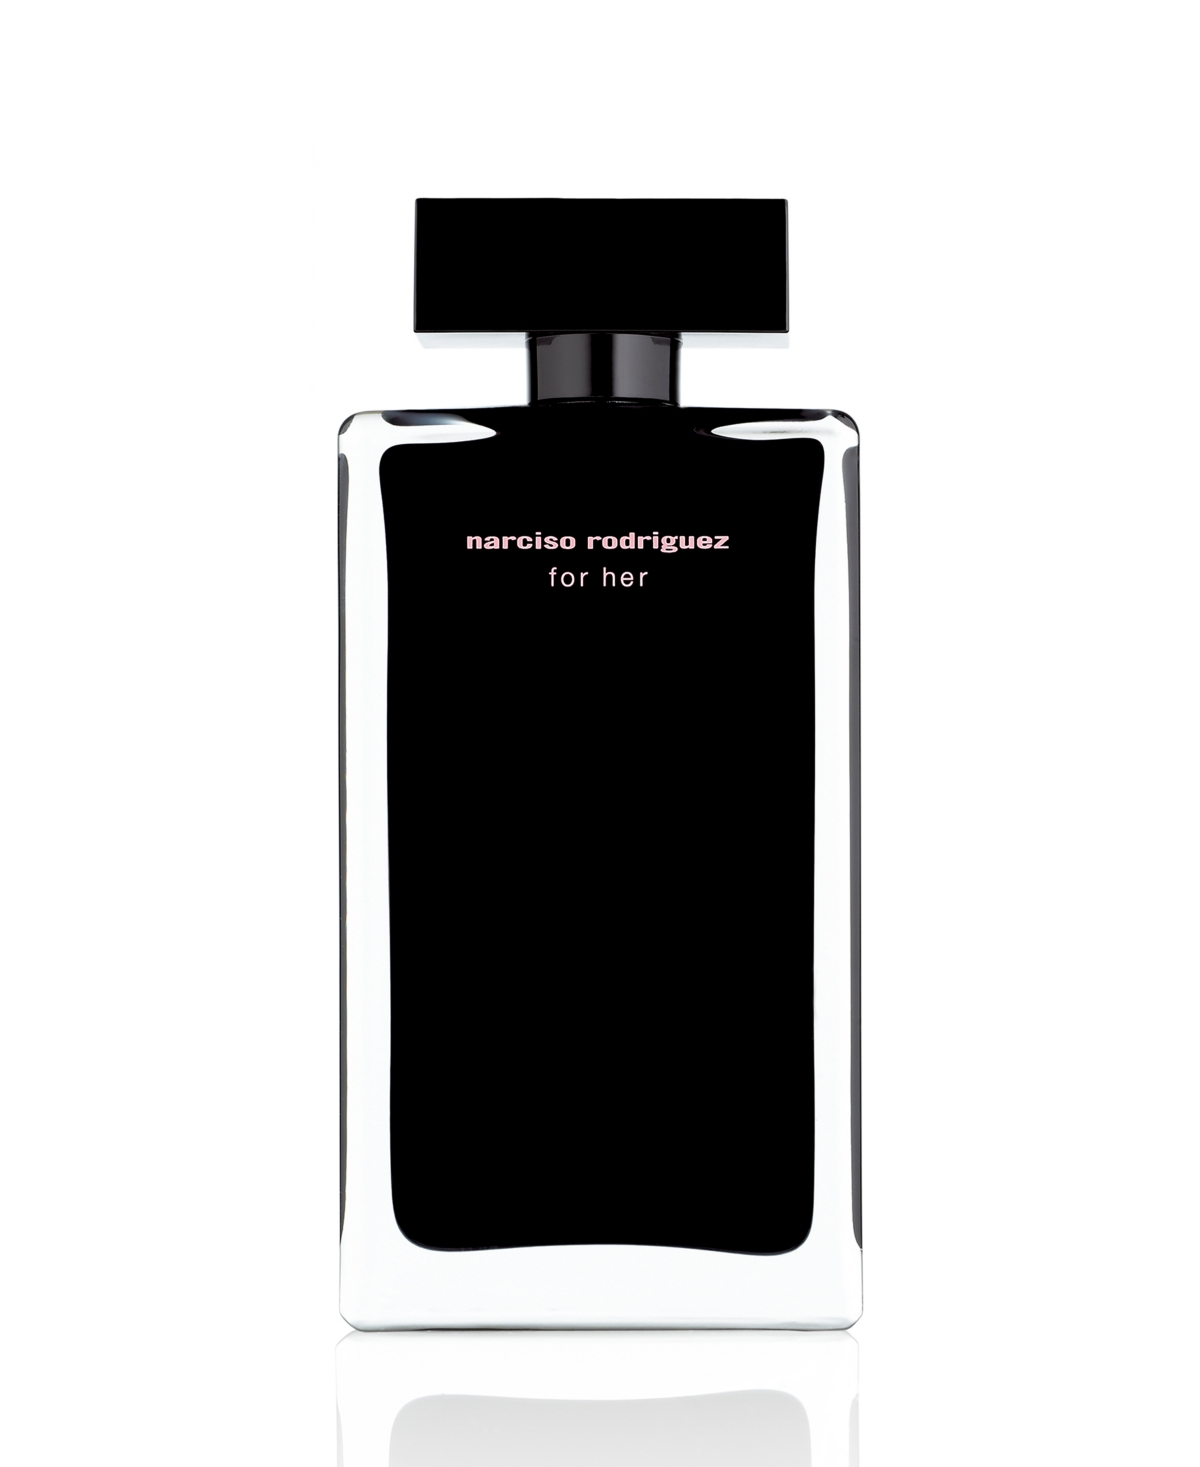 Narciso for her eau toilette spray, 5 oz. & Reviews - Perfume - Beauty - Macy's